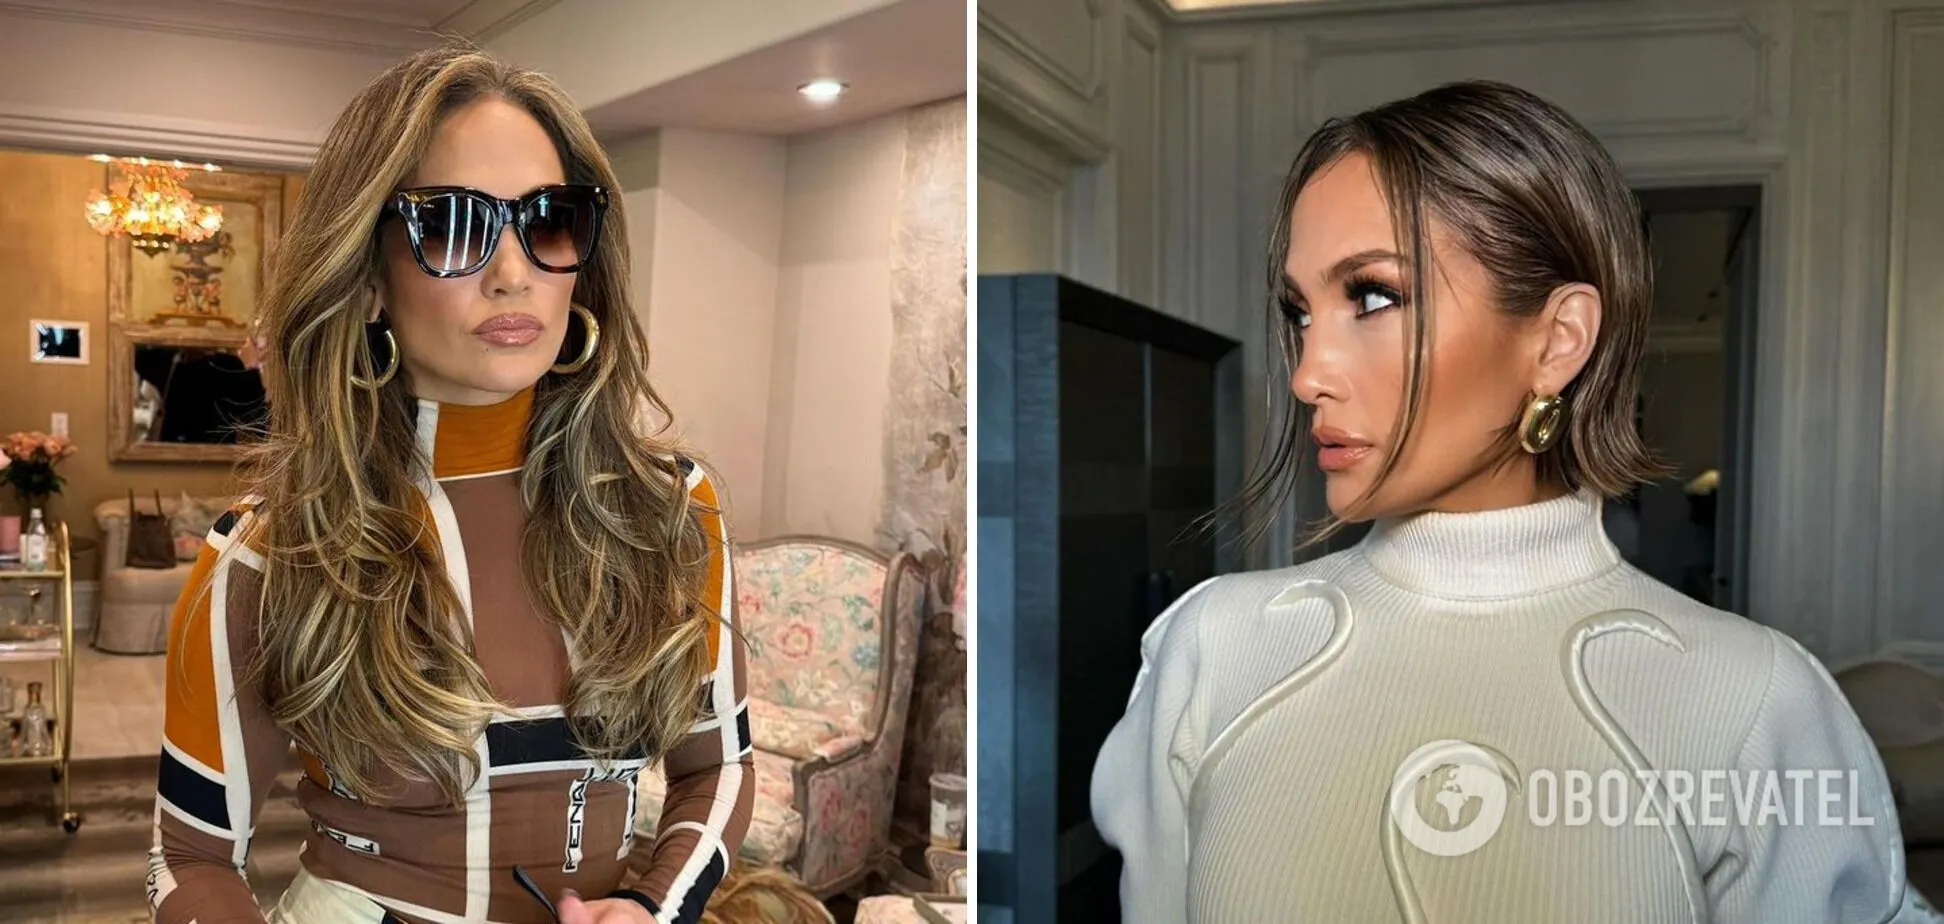 Jennifer Lopez cut off her gorgeous hair for a super trendy hairstyle that everyone will soon be doing. Before and after photos